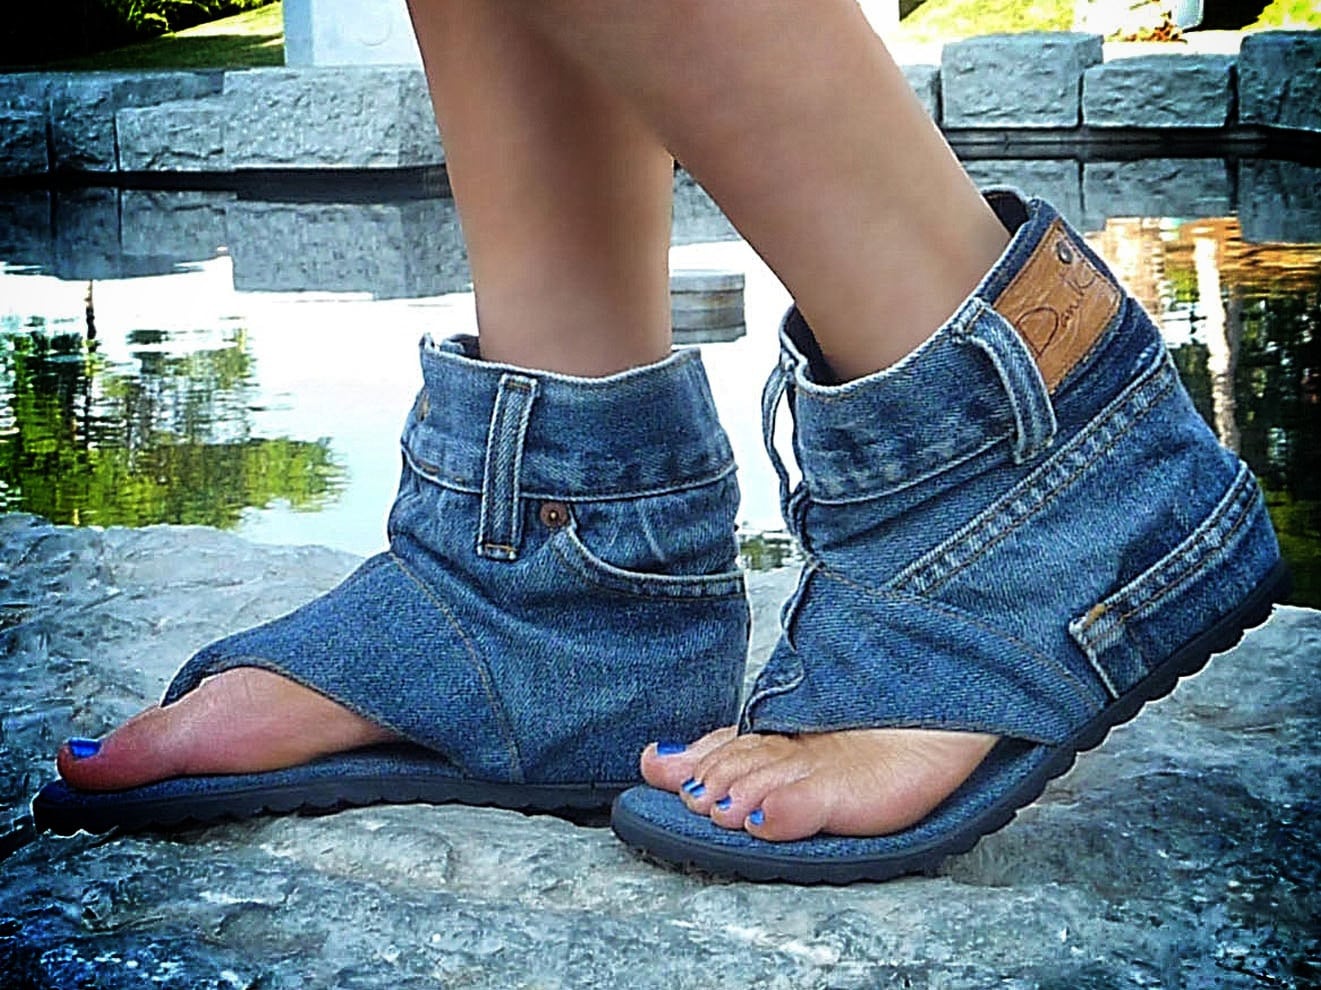 Denim Shoes: Ferociously Funky Sandals Made From Vintage Jeans